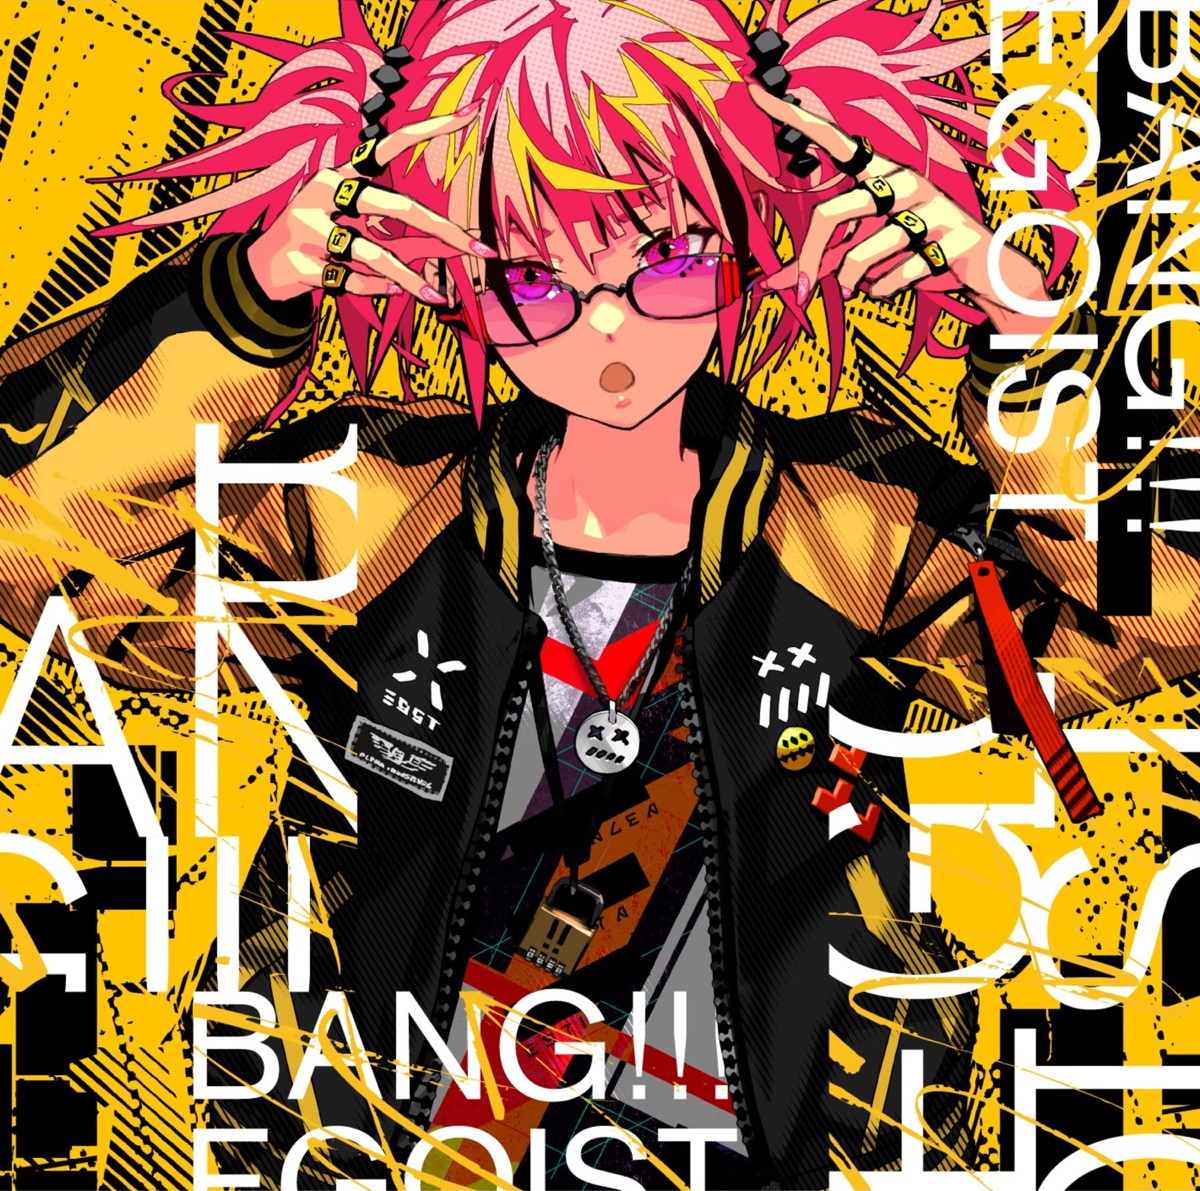 Cover art for『EGOIST - Tonight Tonight』from the release『BANG!!!